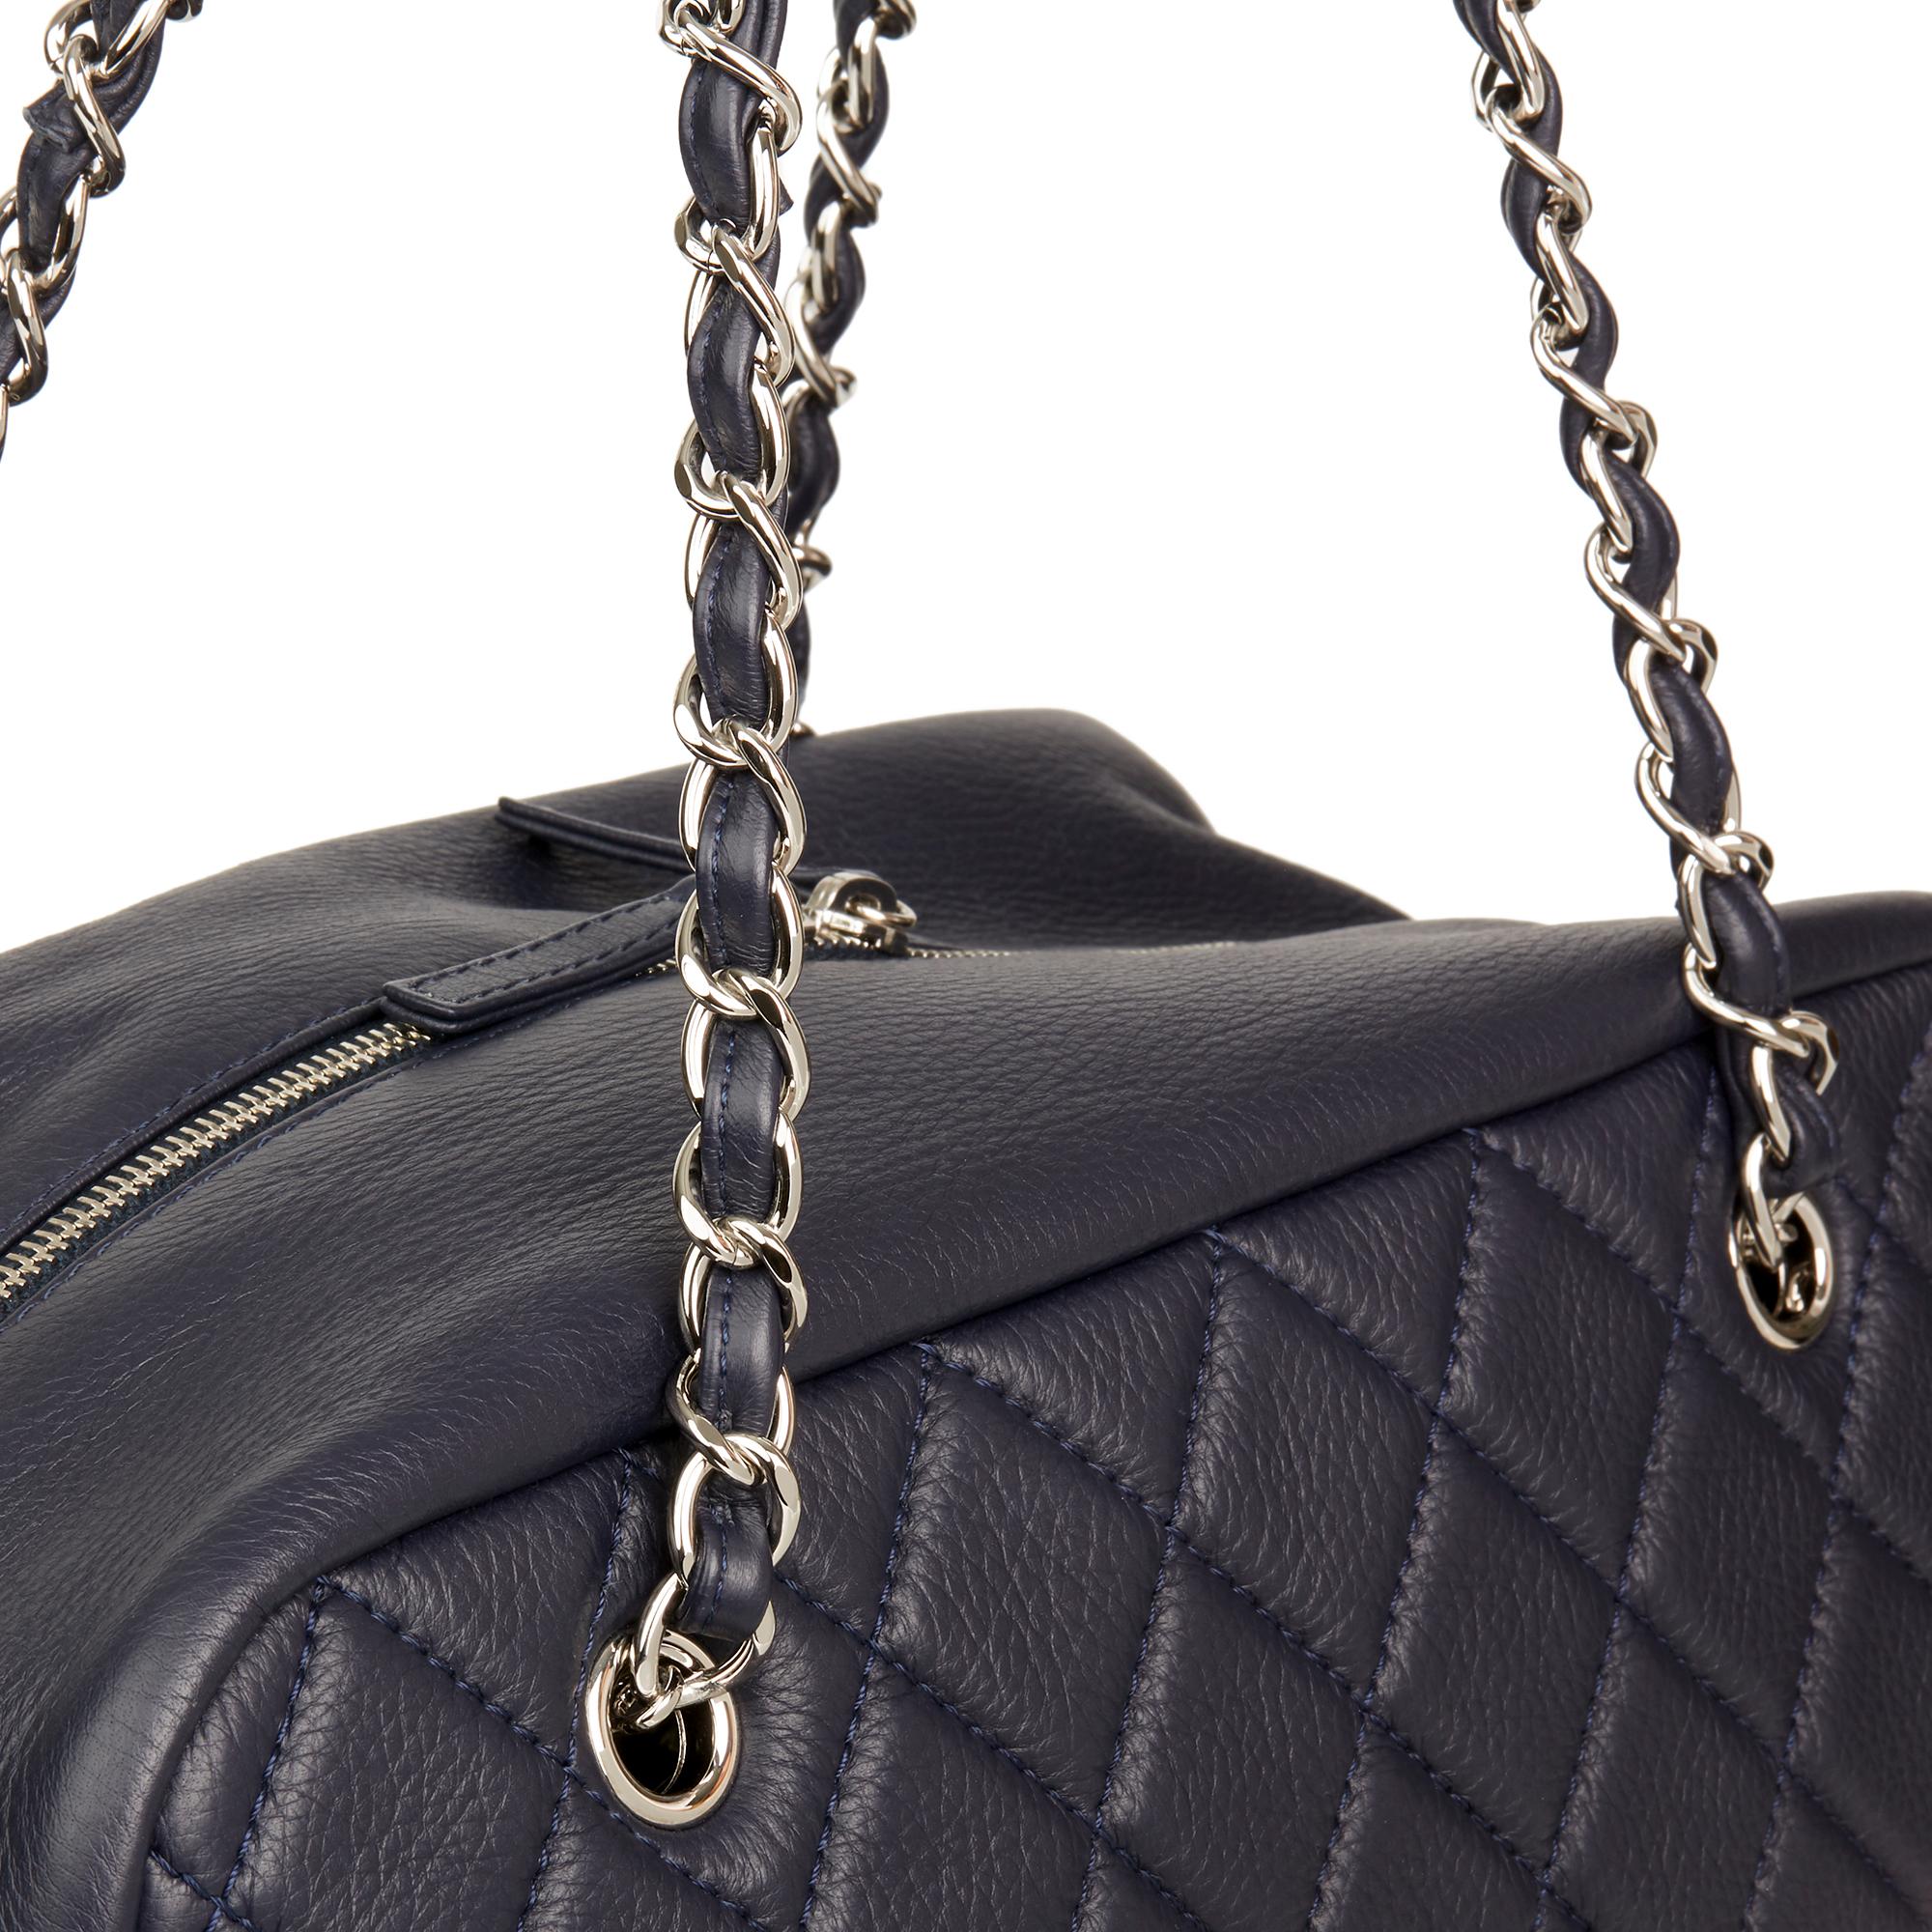 2016 Chanel Navy Quilted Calfskin Leather Jumbo Classic Camera Bag 2